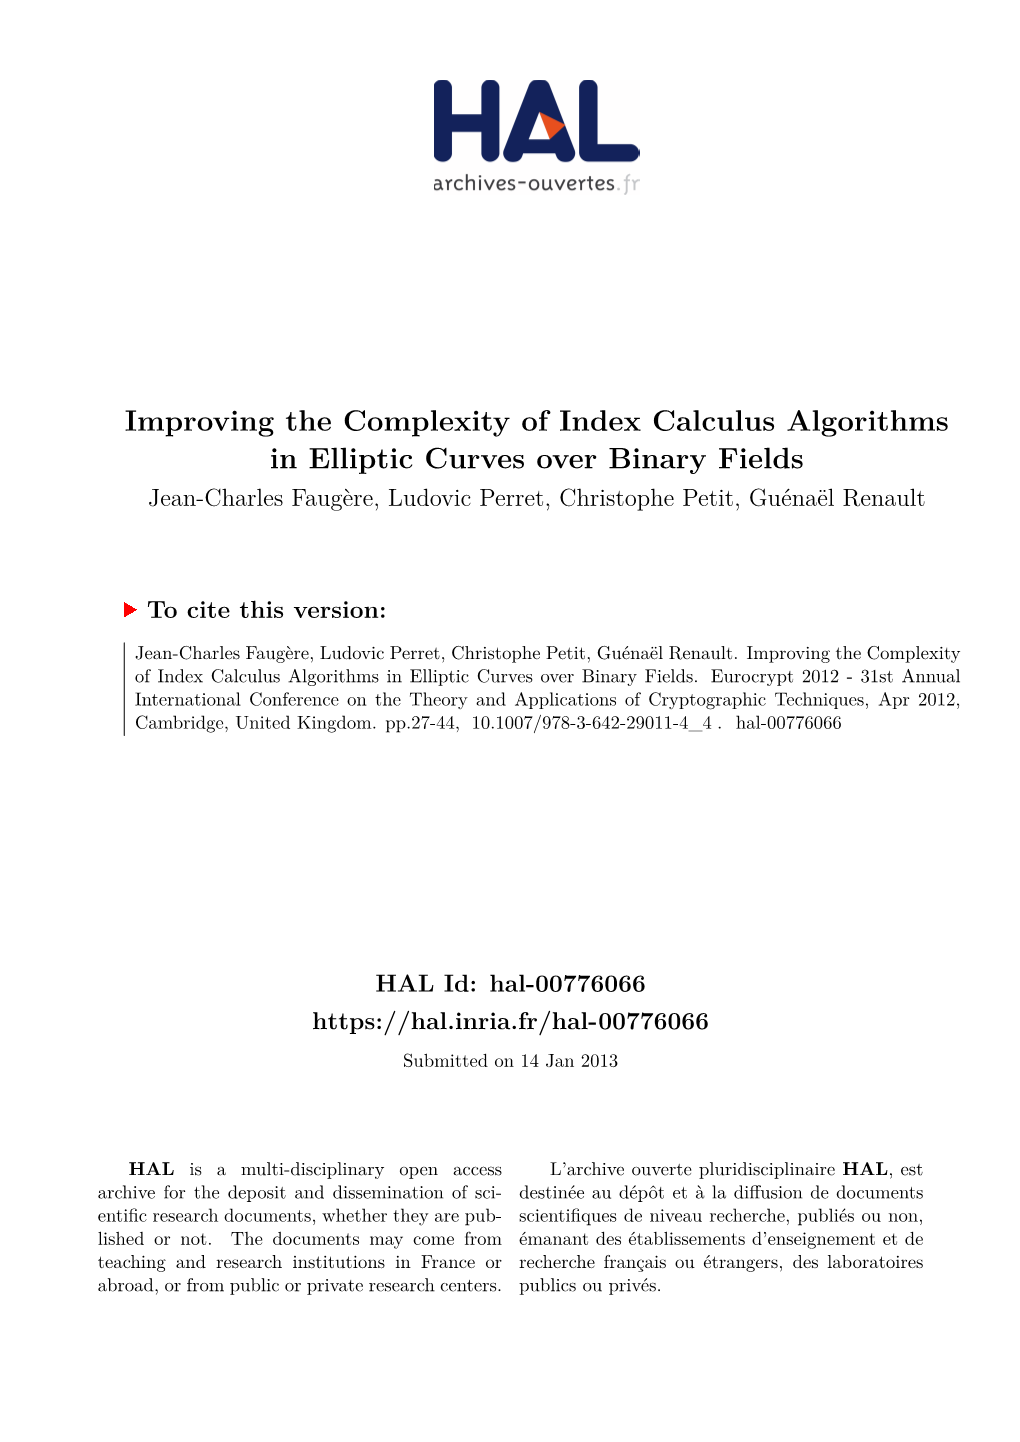 Improving the Complexity of Index Calculus Algorithms in Elliptic Curves Over Binary Fields Jean-Charles Faugère, Ludovic Perret, Christophe Petit, Guénaël Renault